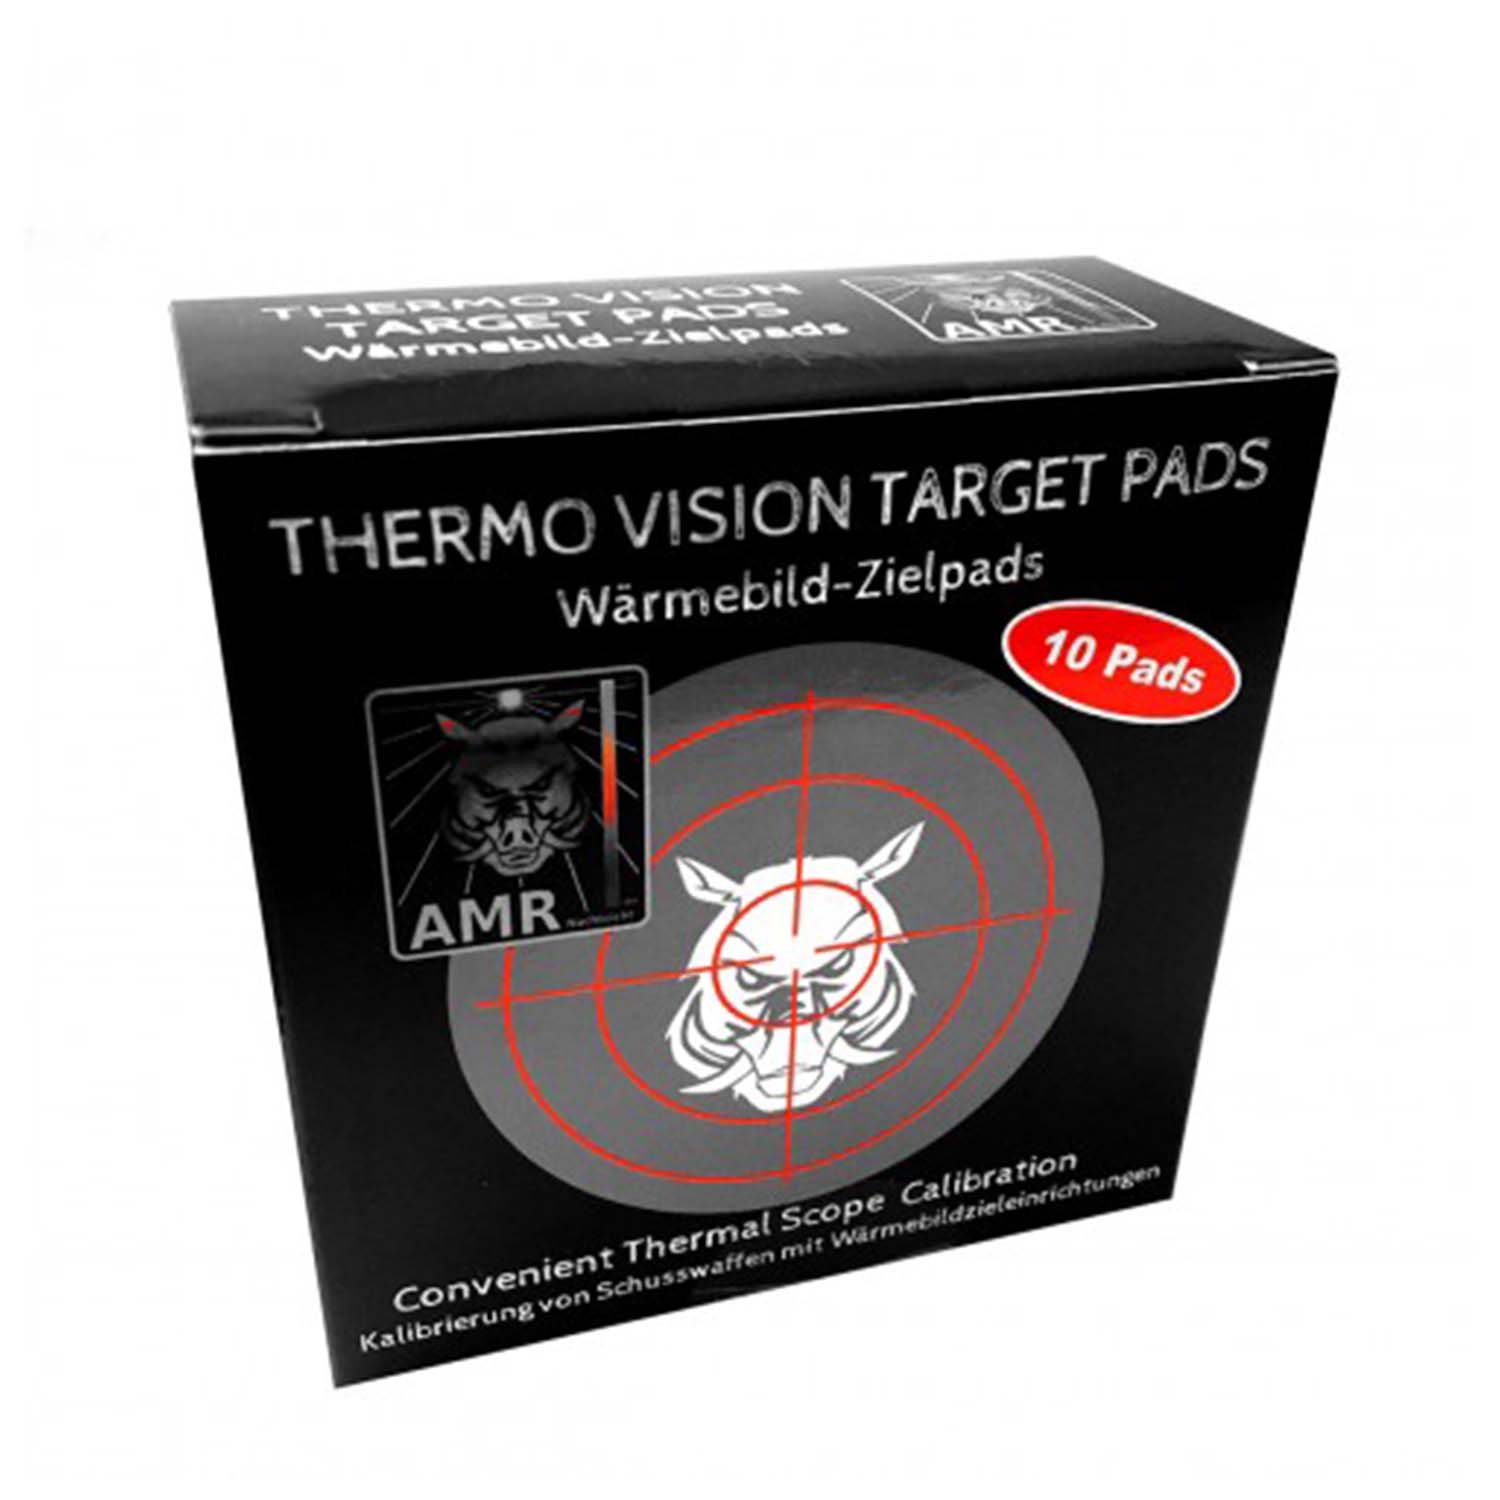 AMR Thermo Vision Target Pads